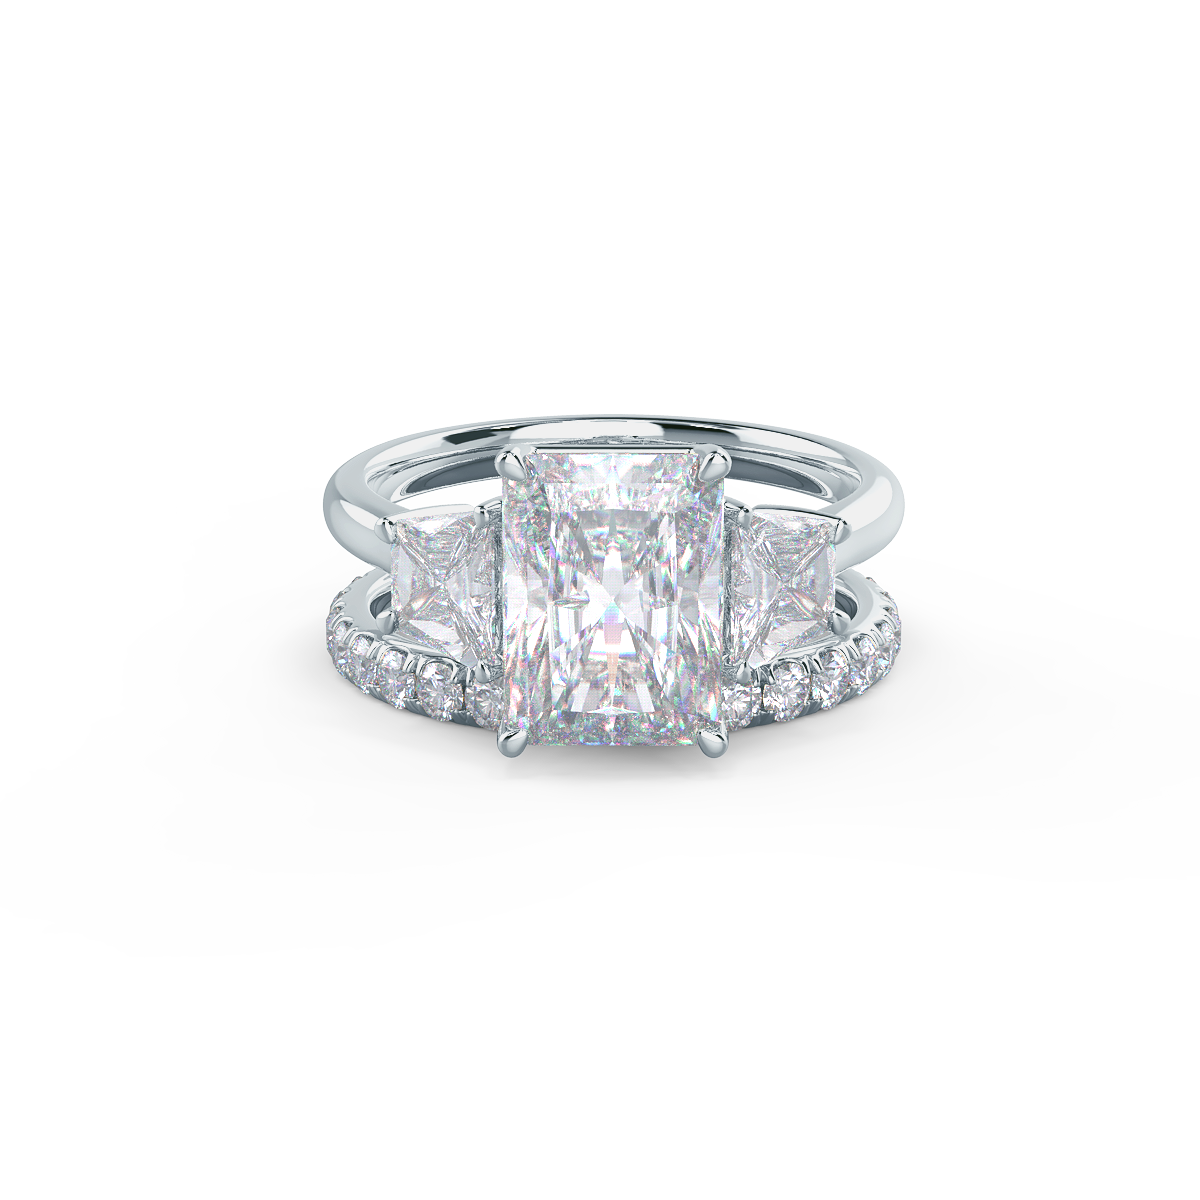   This setting pairs with a variety of wedding band styles.    View Wedding Band Details  